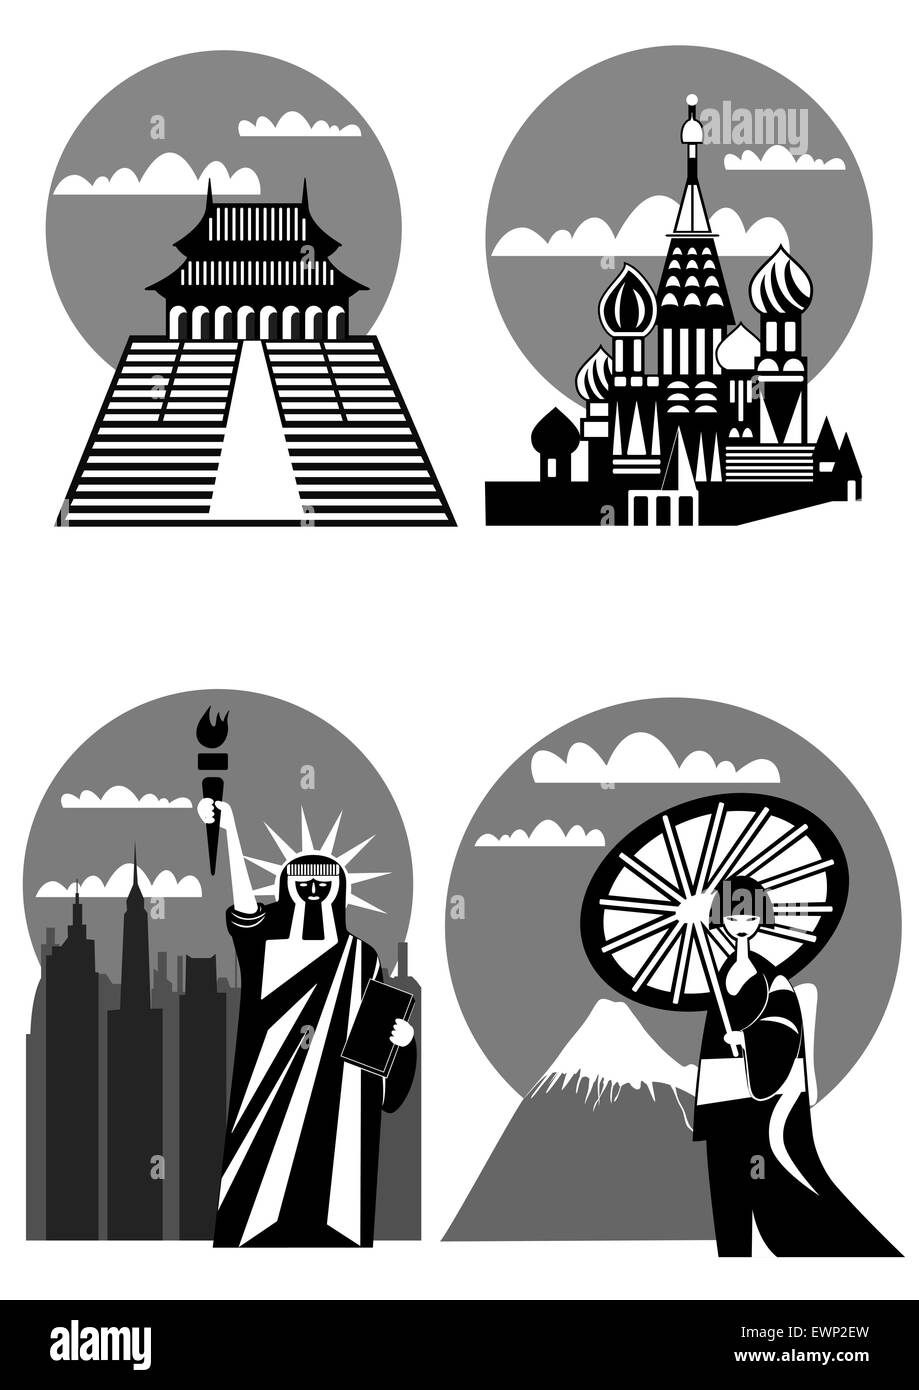 various famous landmarks and monuments - Japan, New York, Far East, Moscow Stock Vector